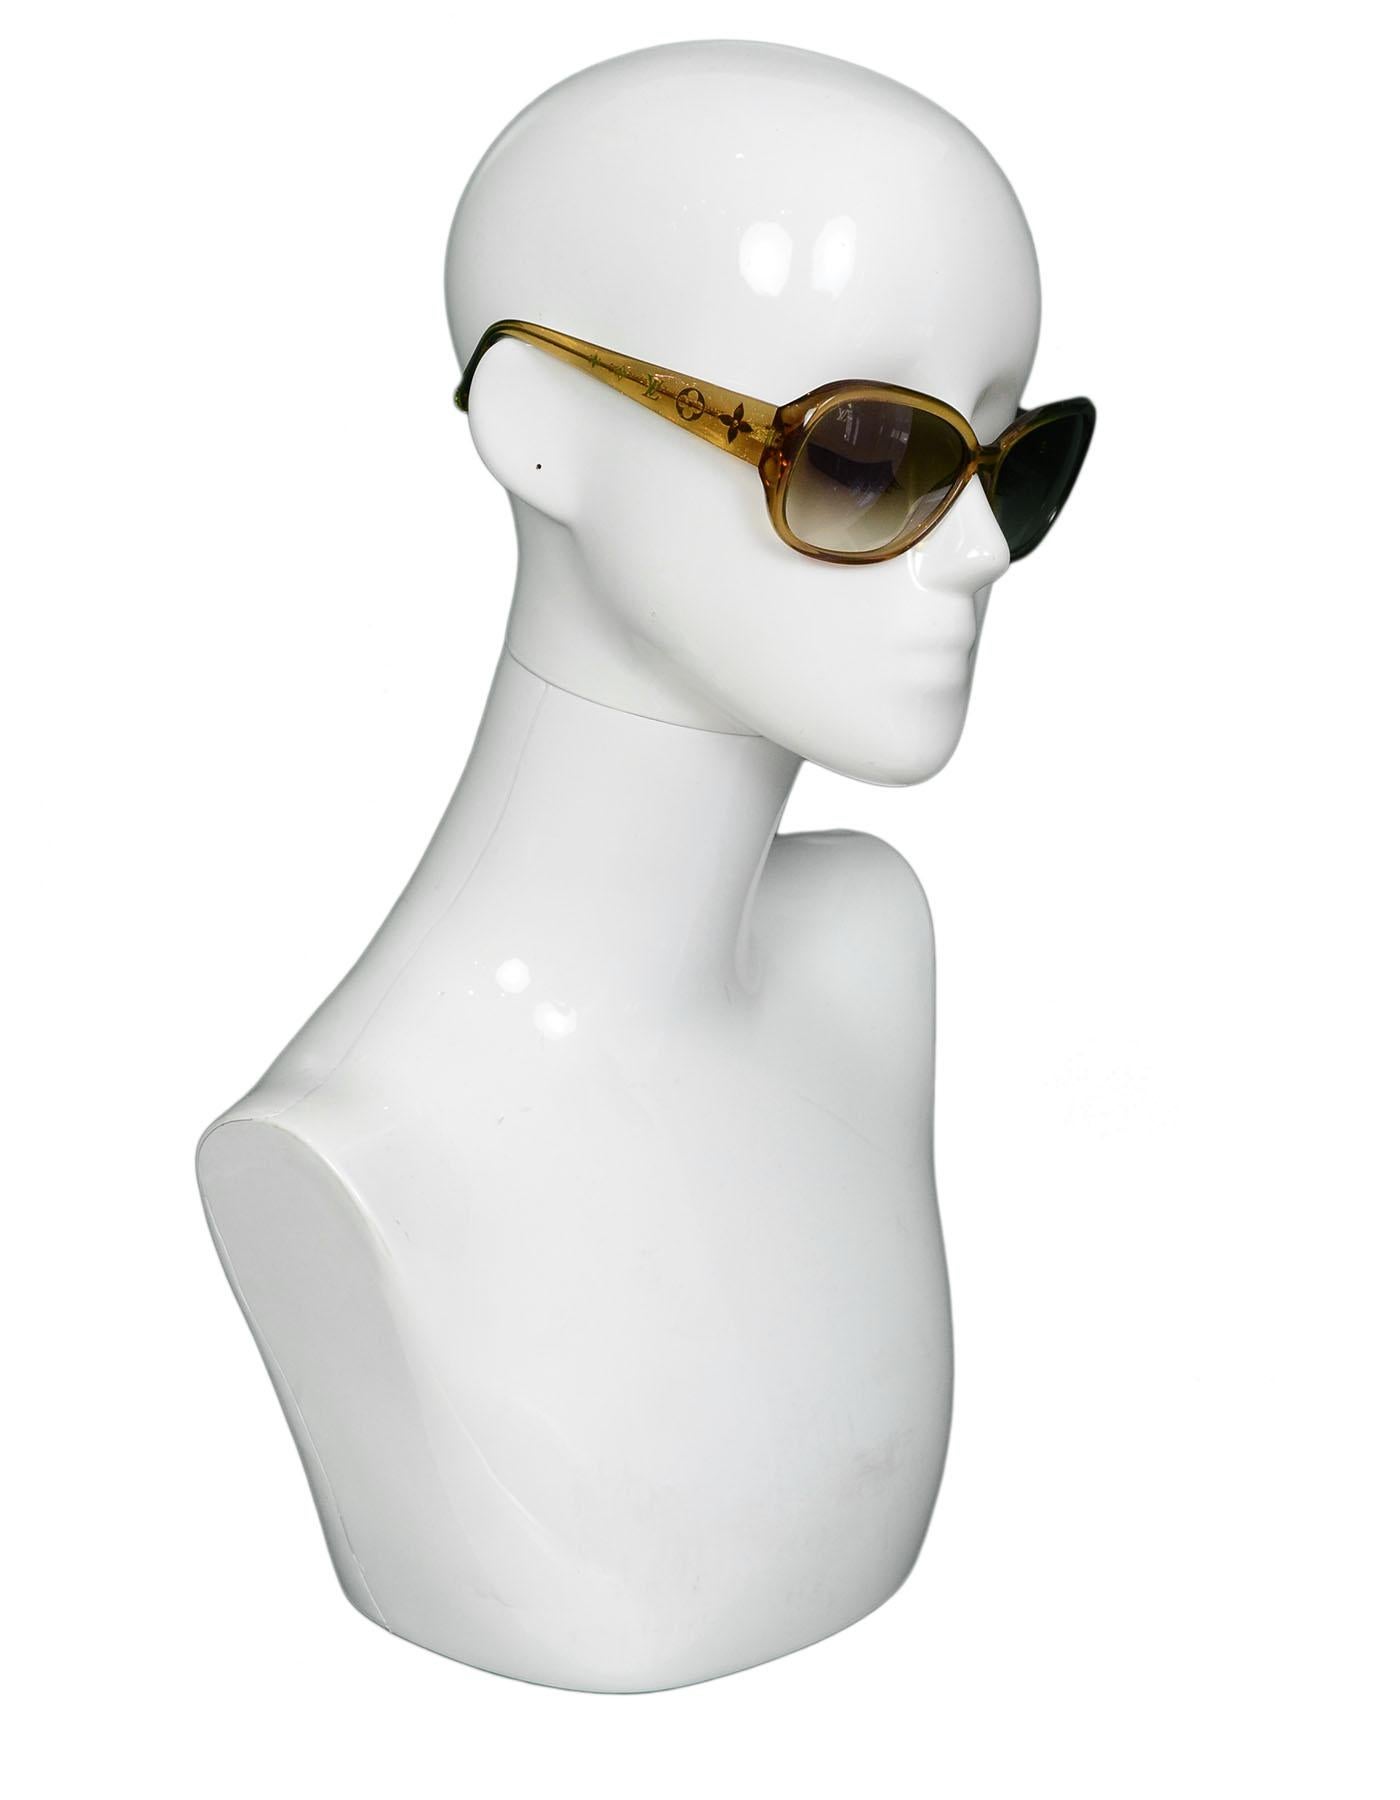 Louis Vuitton Honey Glitter Acetate Obsession GM Z0460W Sunglasses
Features fine glitter sparkles in frame and monogram at arms

Made In: Italy
Color: Honey
Materials: Resin, metal
Overall Condition: Excellent pre-owned condition with the exception